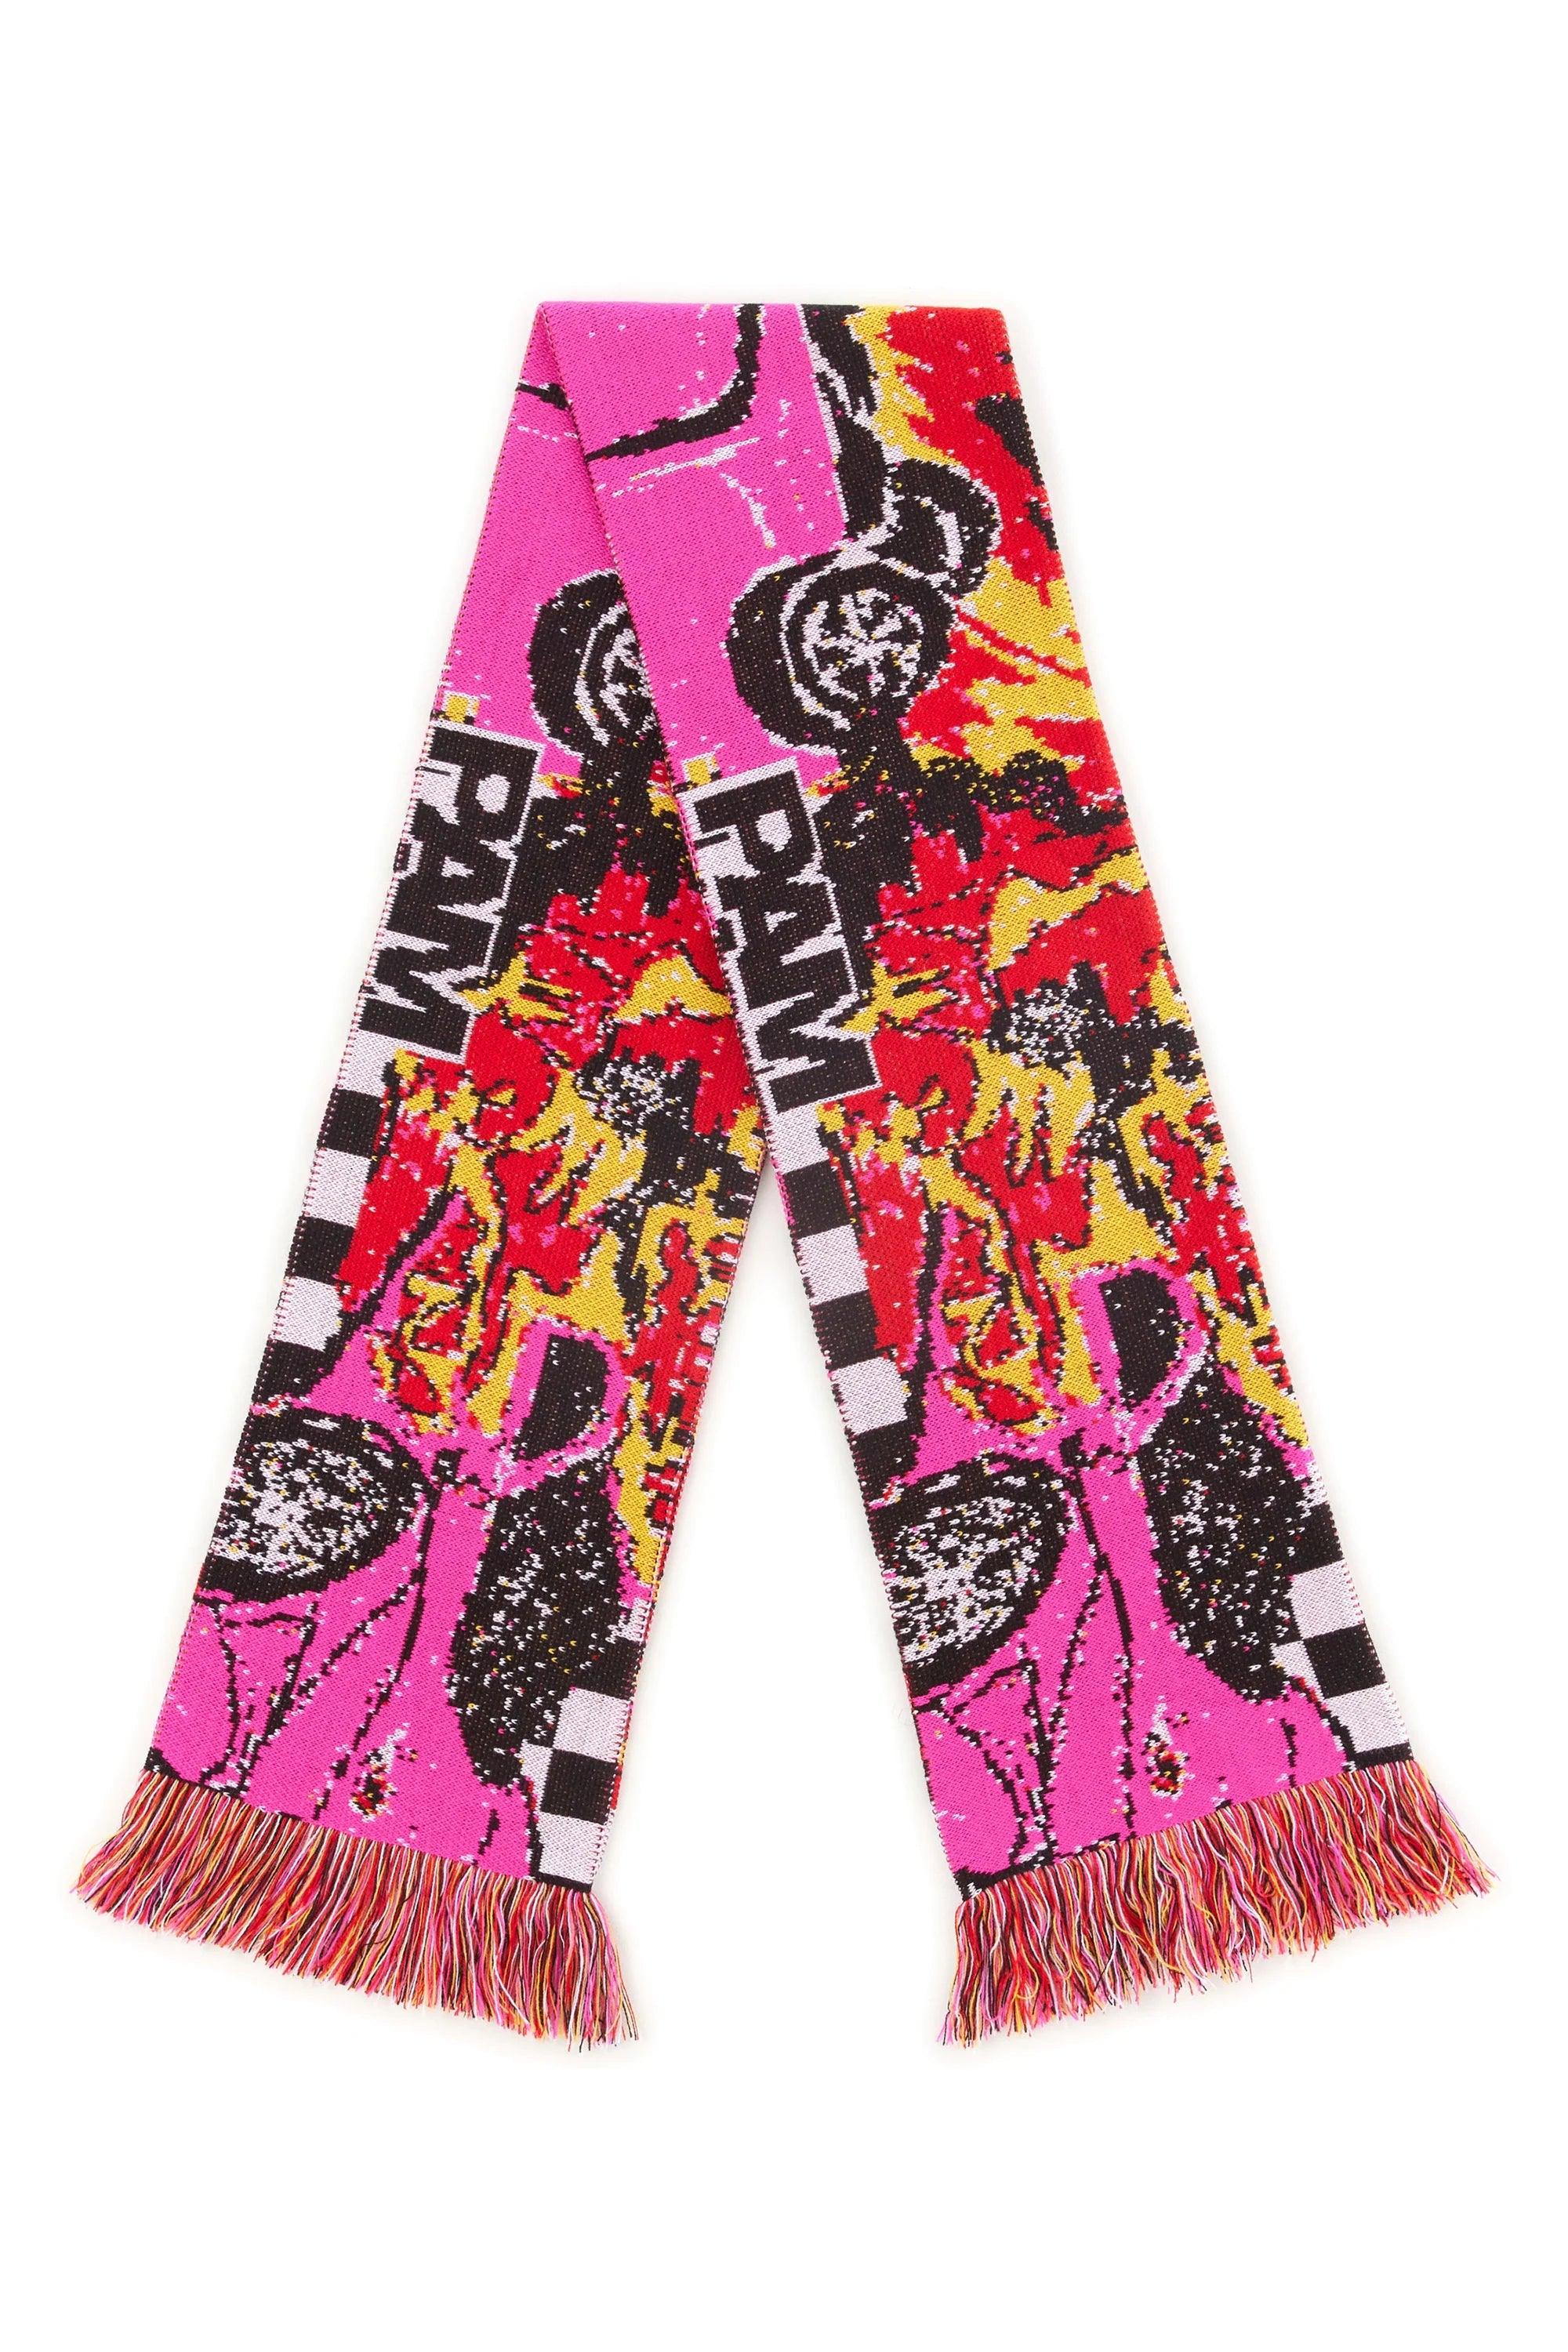 PAM / Perks and Mini - Engulfed Scarf - Multi - One size -